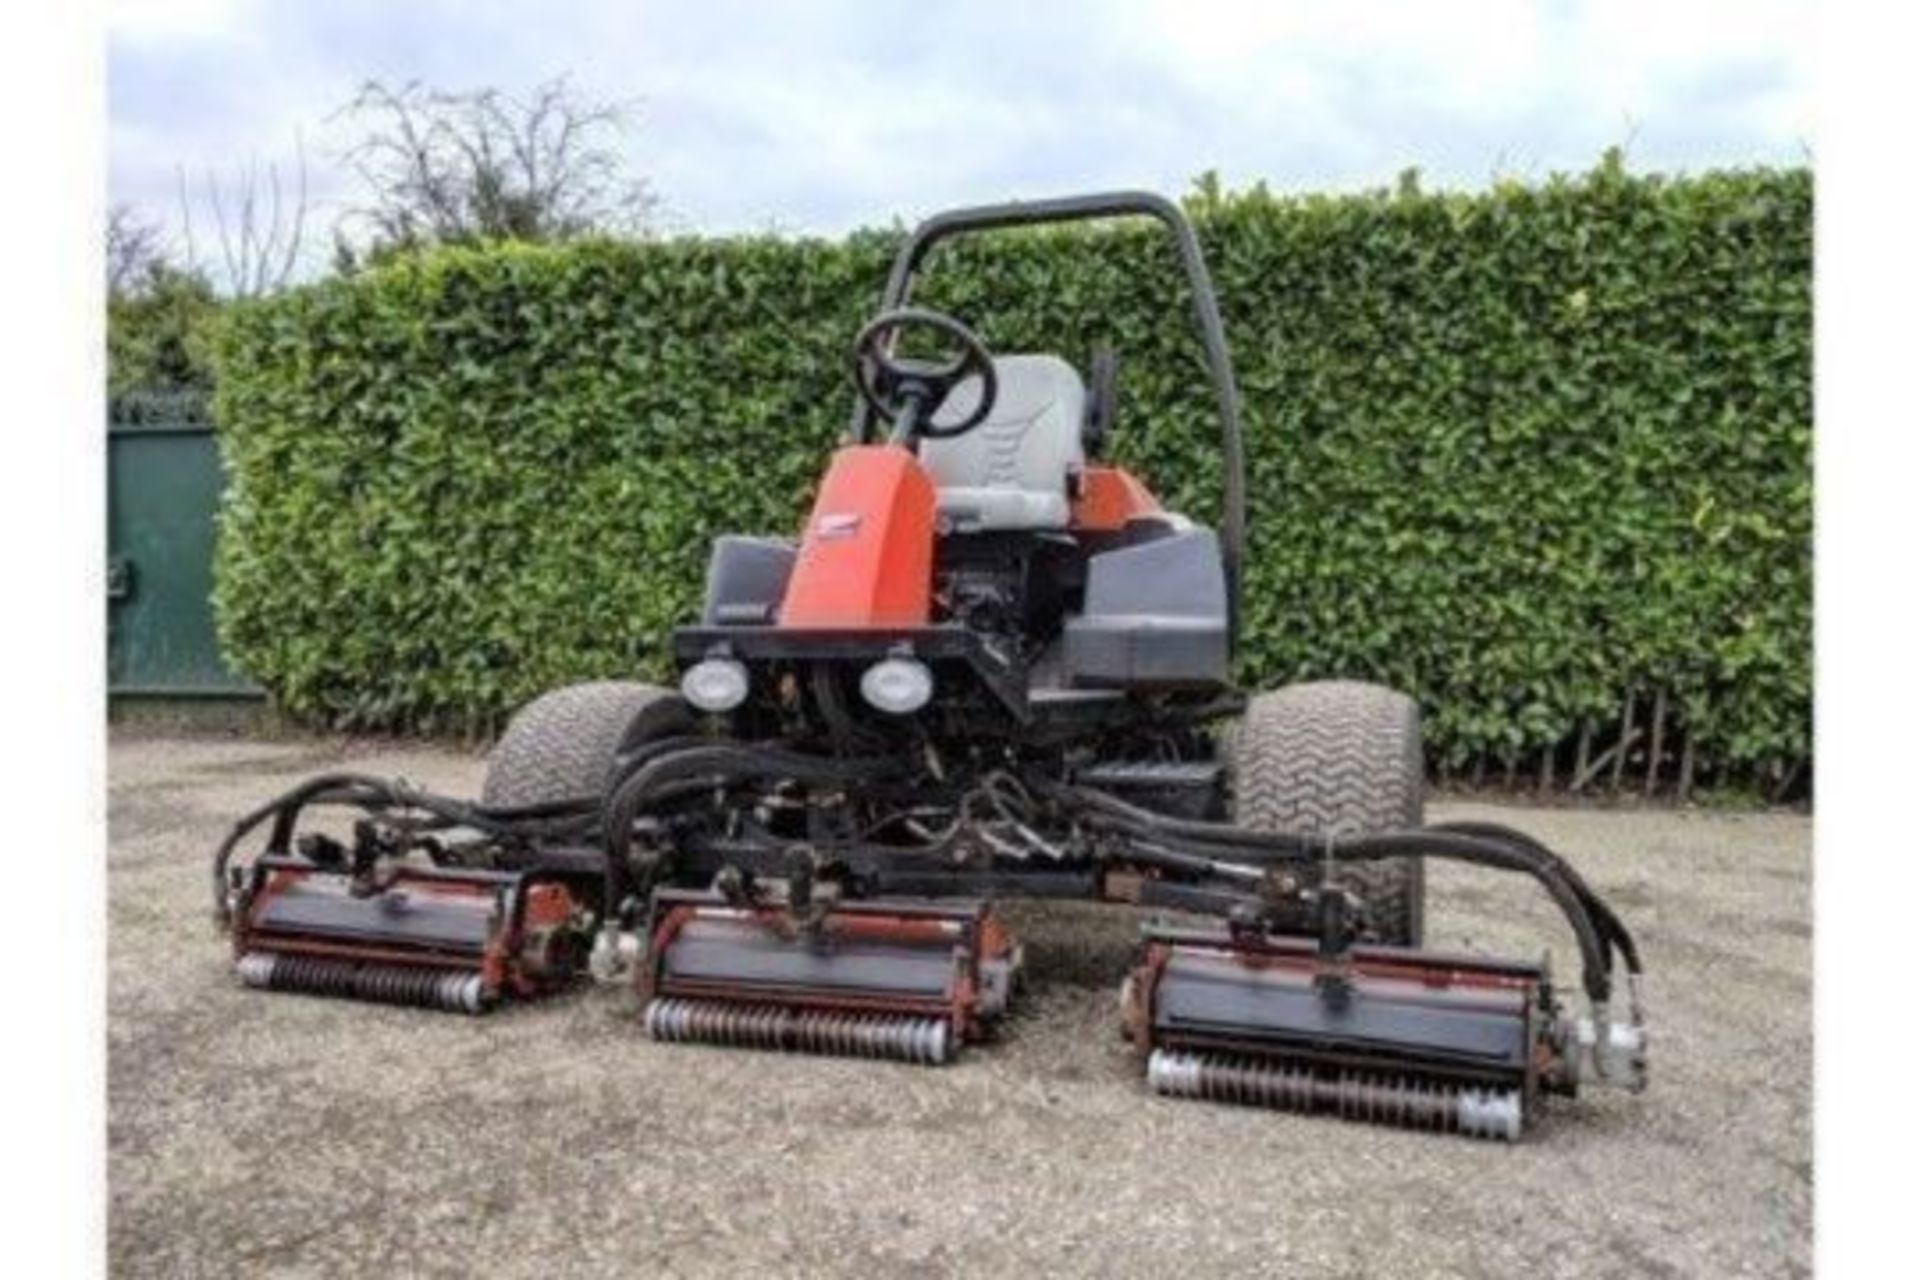 2007 Ransomes Jacobsen LF3800 4WD Cylinder Mower - Image 3 of 6